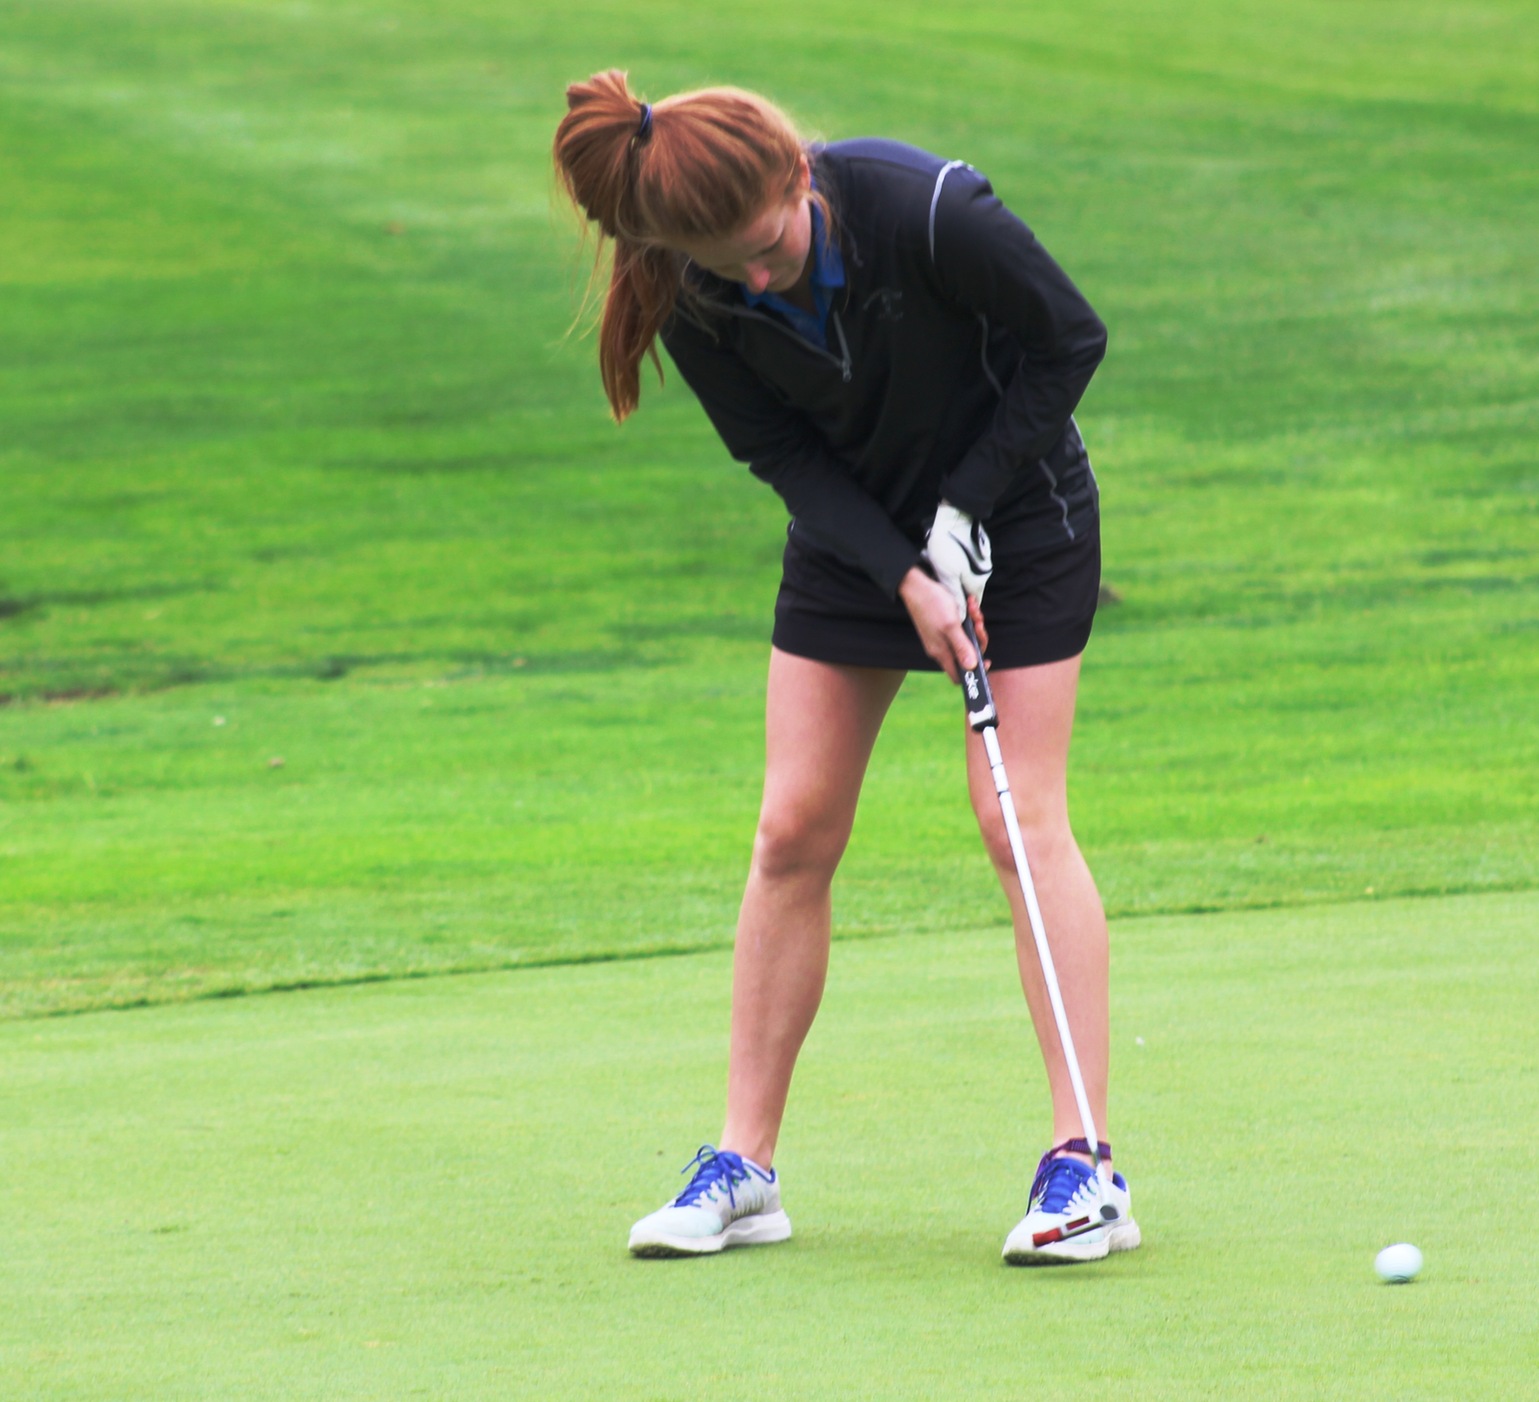 NIACC's Ashley Alert makes a putt during Tuesday's round.